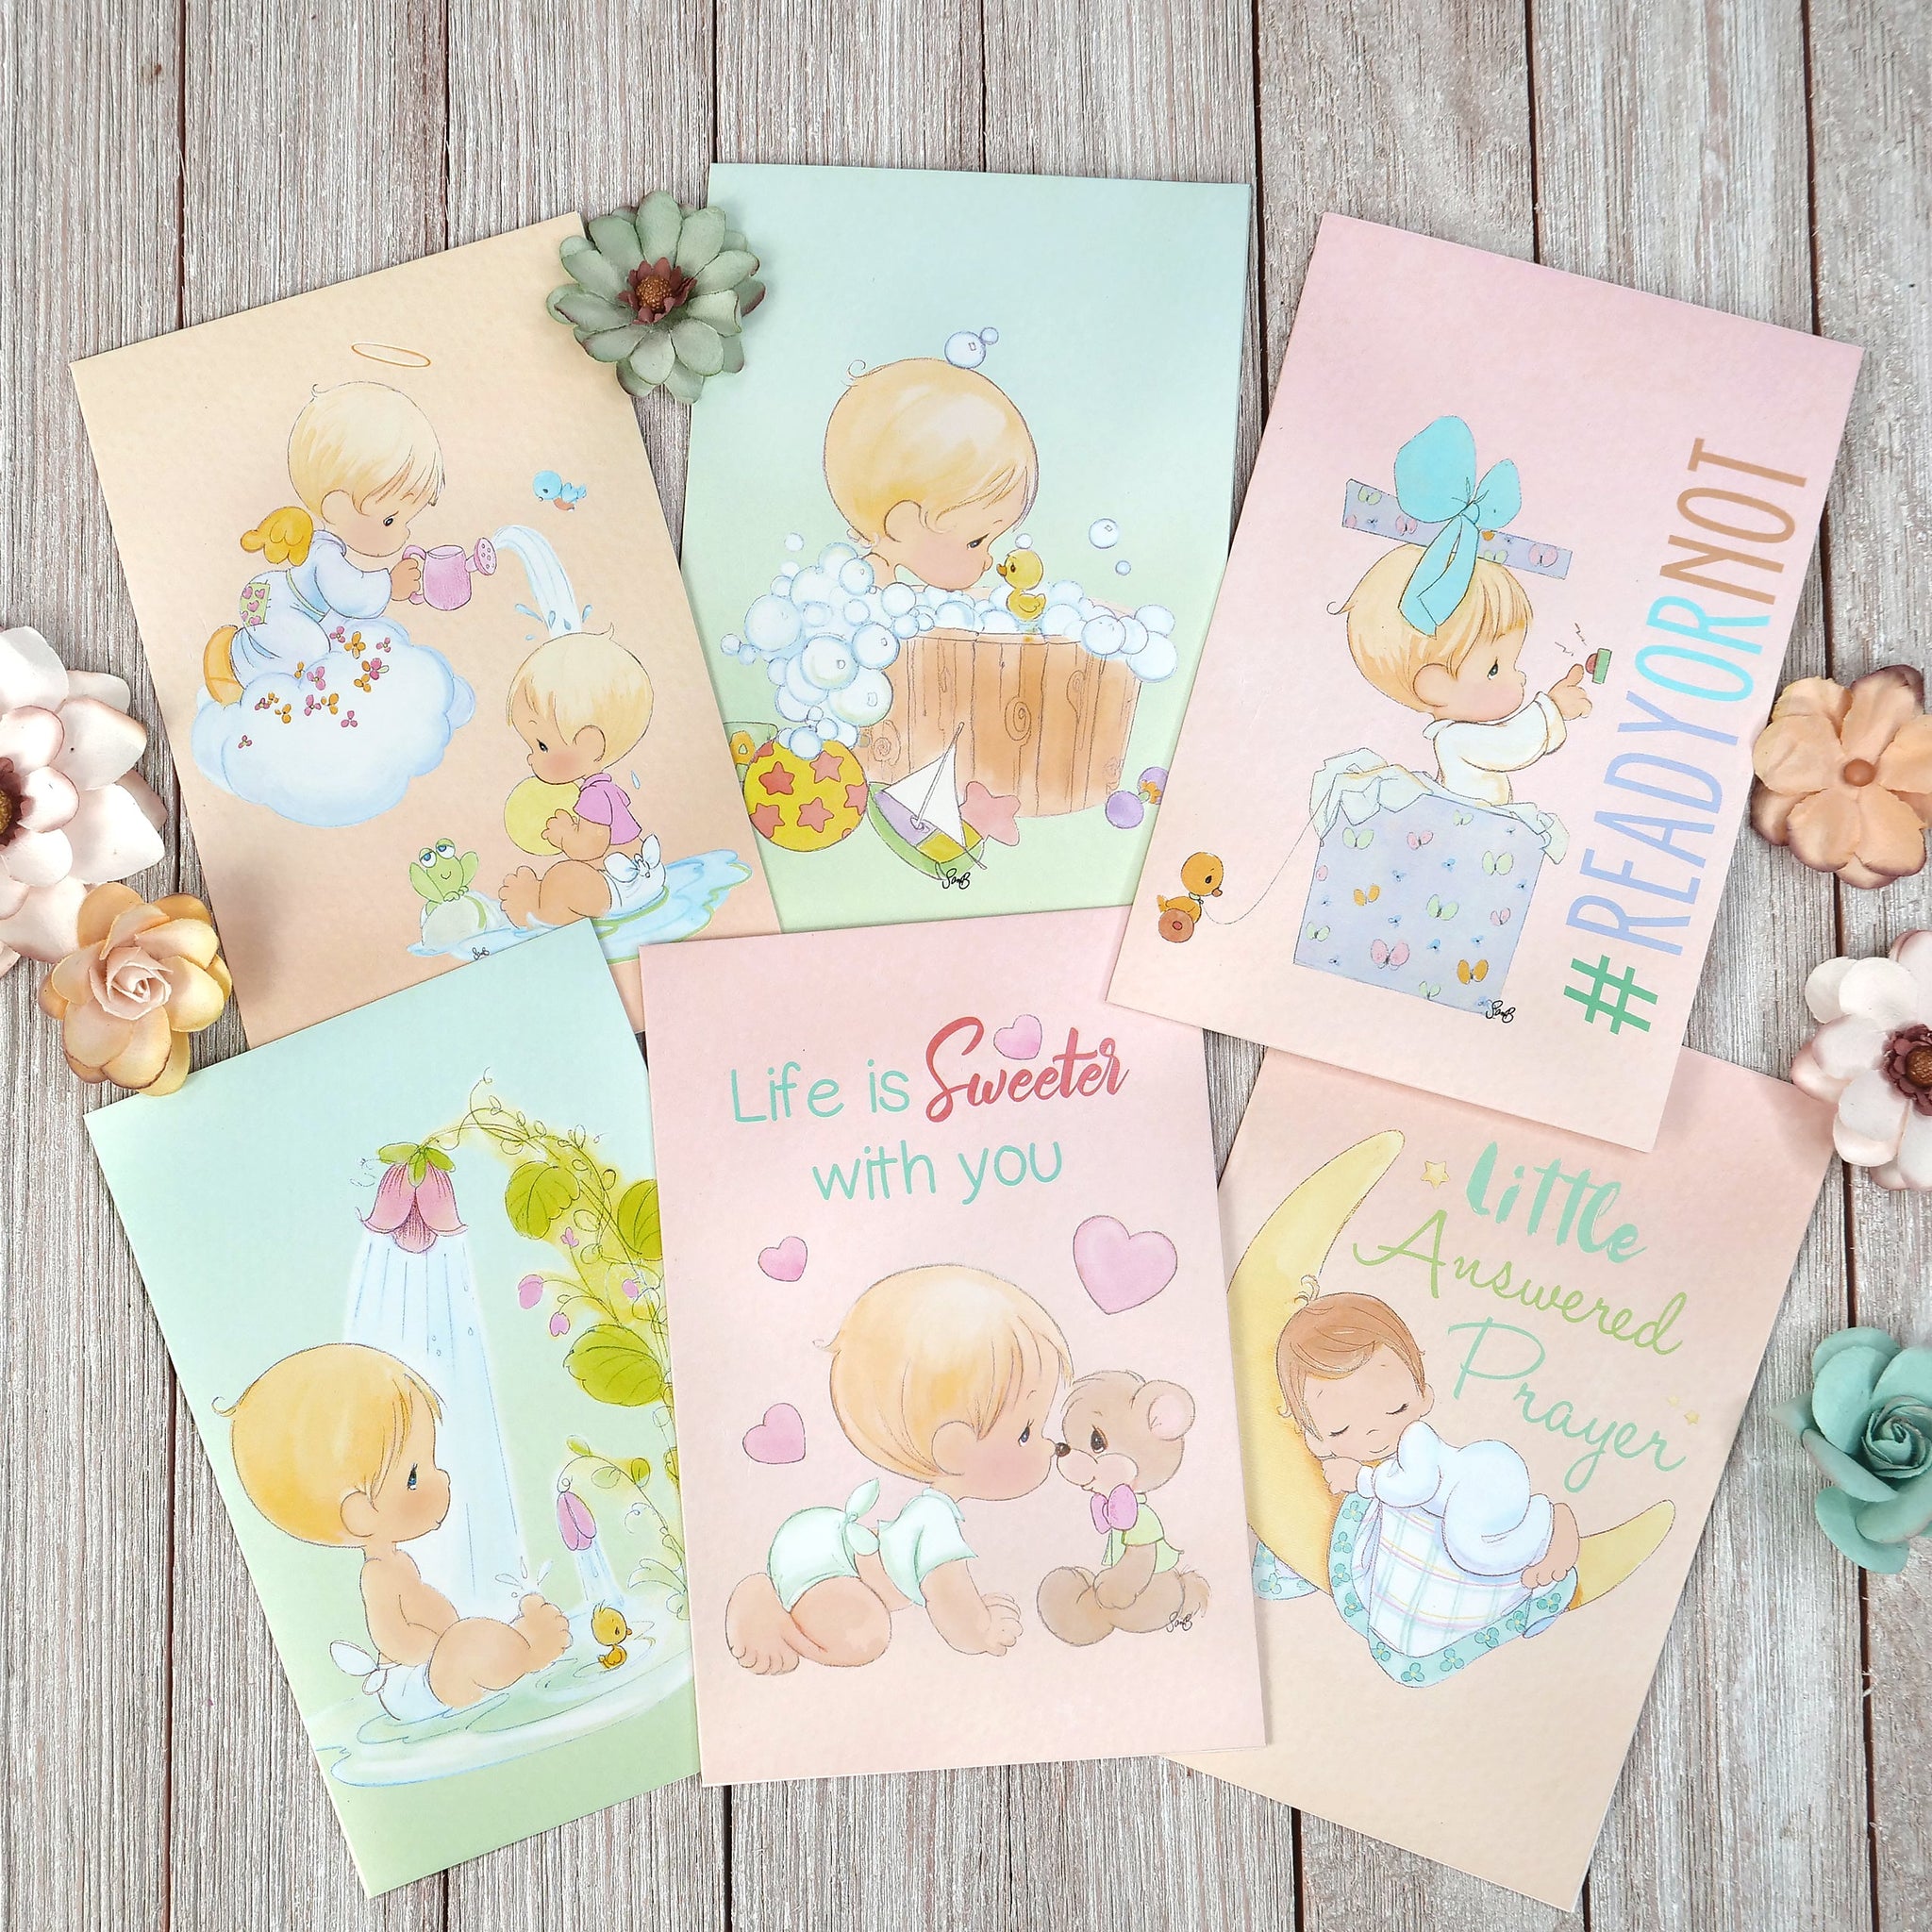 Precious Moments Baby Shower Cards Set - 20 Pack Assortment